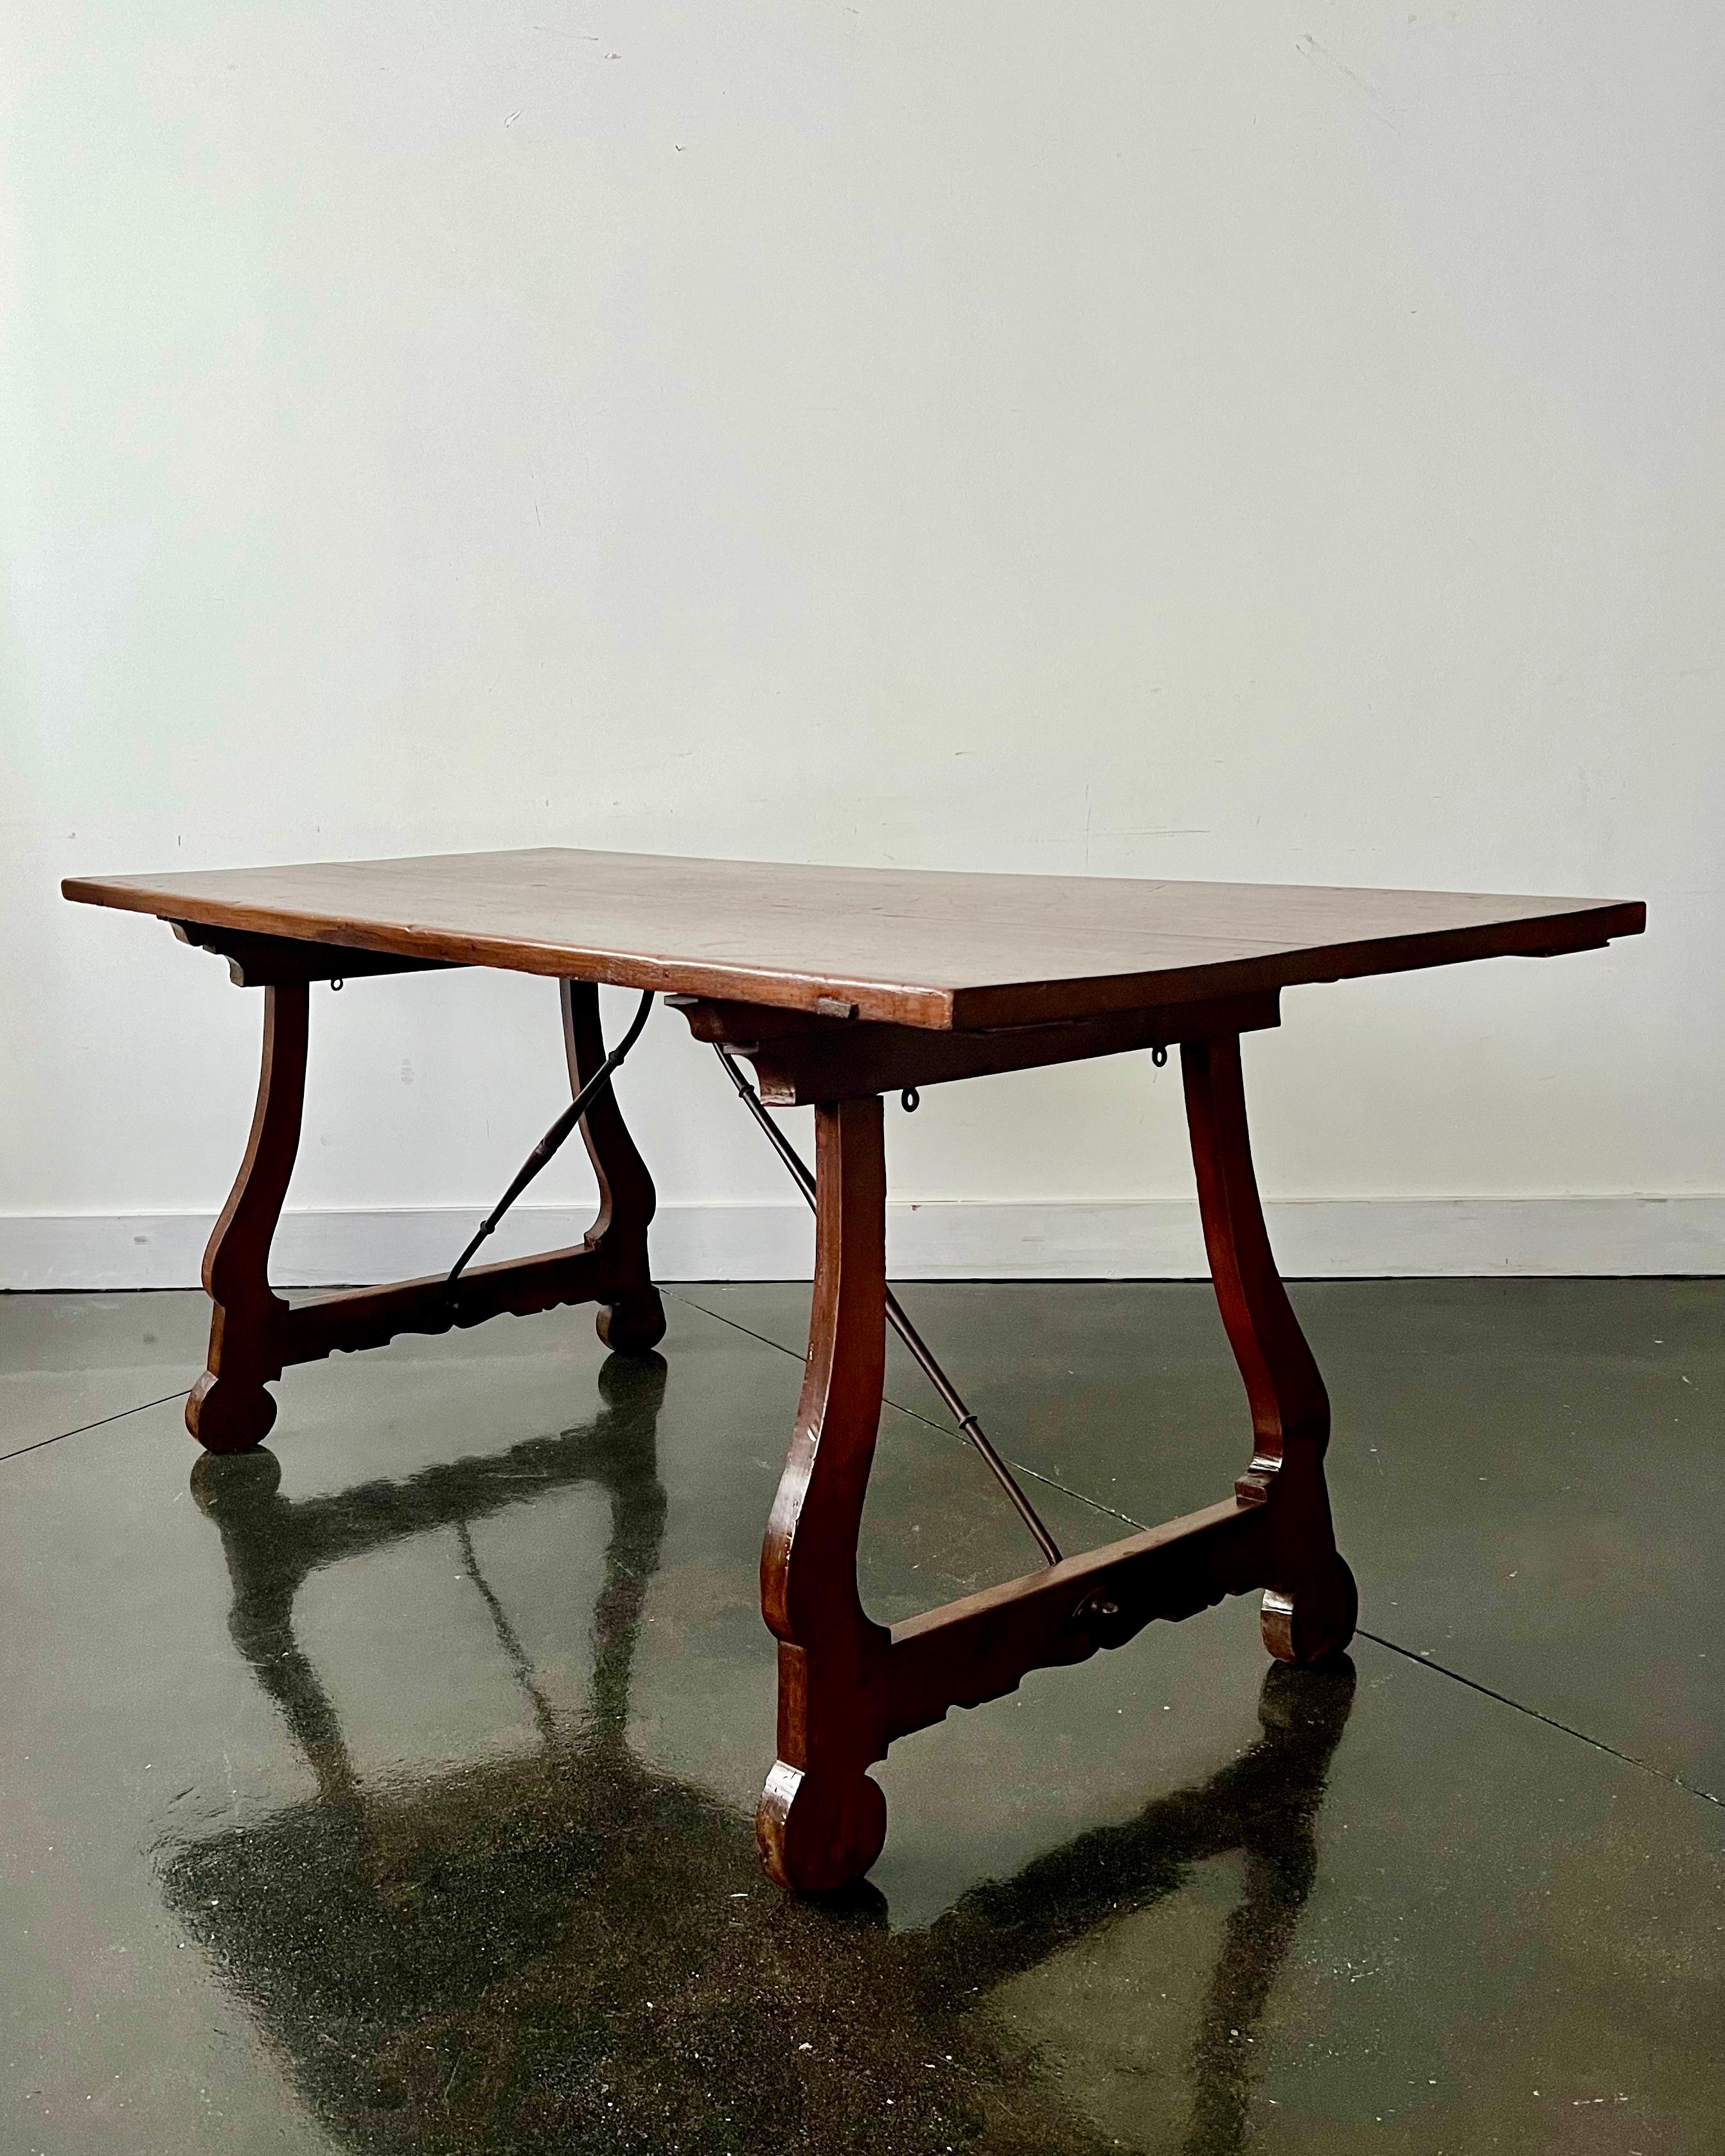 Italian 18th century walnut trestle table/console/center table with scrolled, carved supports joined by wrought iron stretcher and topped with solid walnut rectangular top.